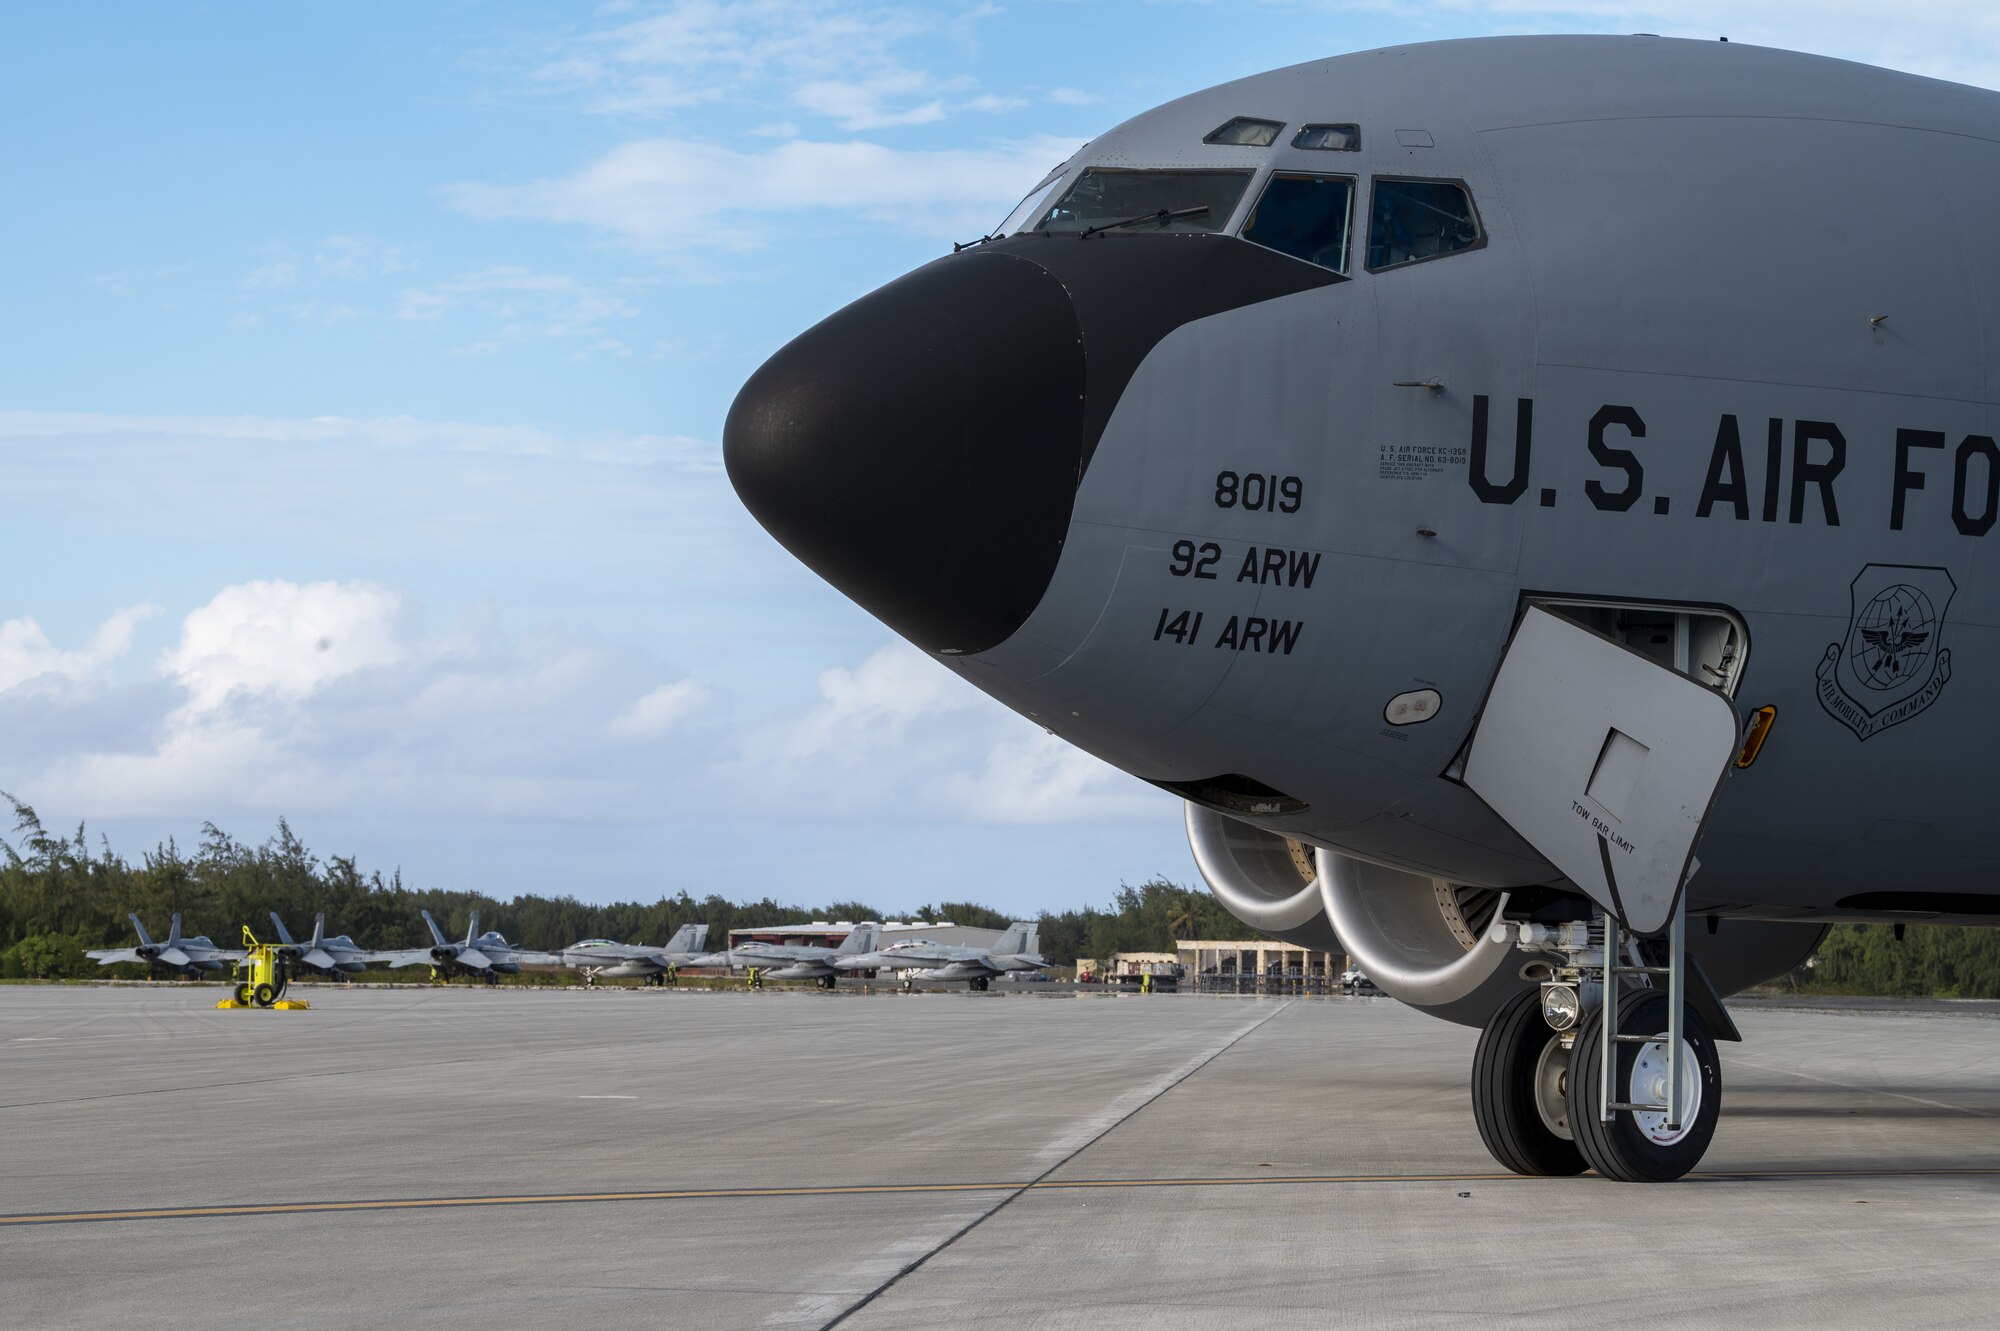 A U.S. Air Force KC-135 Stratotanker and multiple U.S. Marine F/A-18C Hornets are parked on the flightline following an air refueling coronet mission at Wake Island, March 9, 2023. Aircrew from the 384th Air Refueling Squadron conducted an air refueling coronet with Marines from the Marine Fighter Attack Squadron 312, demonstrating the critical role mobility forces have in projecting the joint force anywhere, anytime. (U.S. Air Force photo by Staff Sgt. Lawrence Sena)